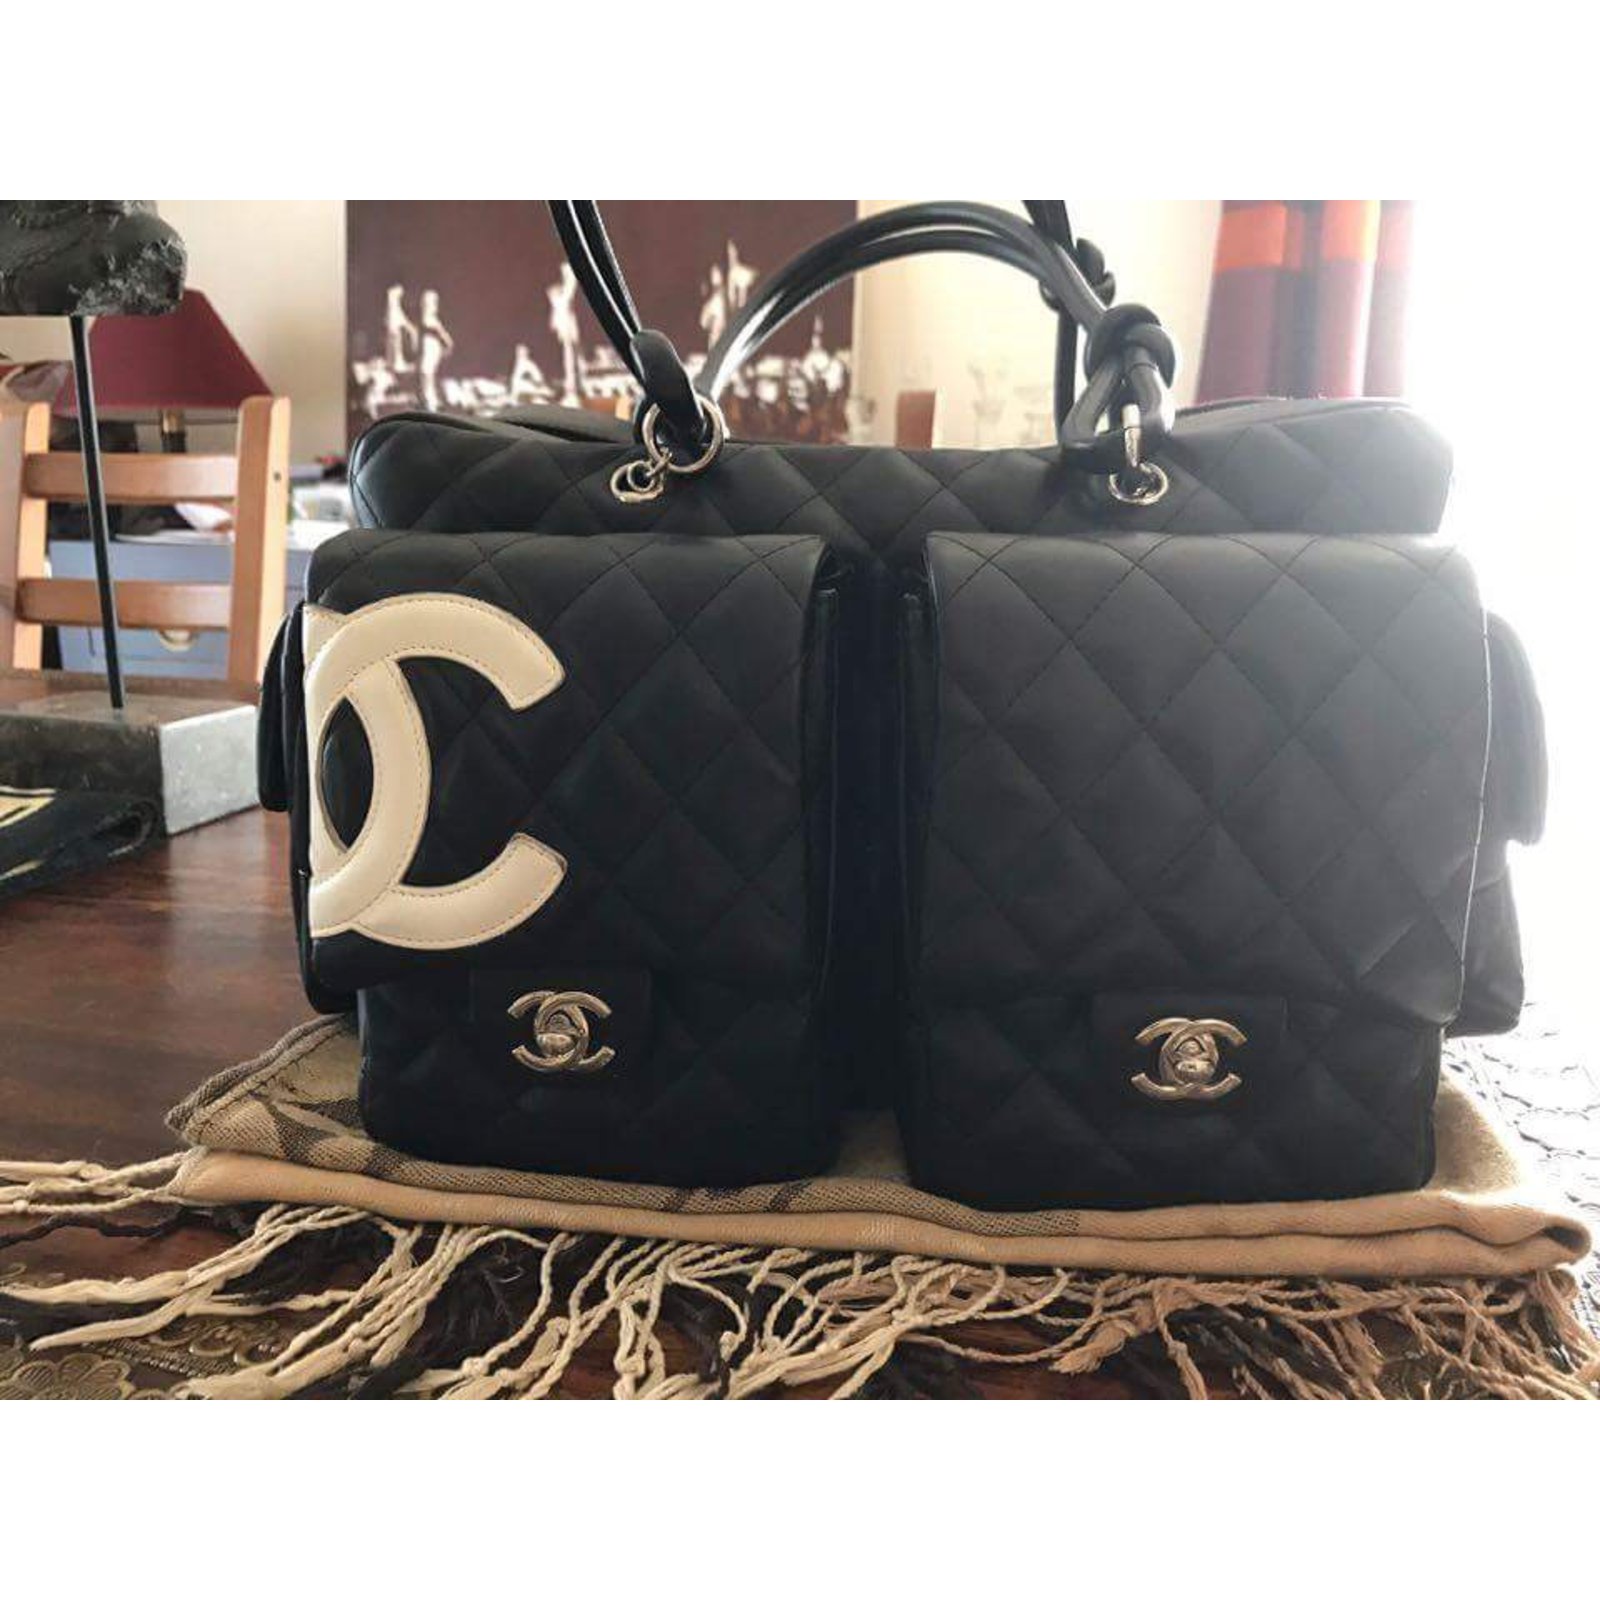 Chanel Cambon reporter bag  Bags, Chanel cambon, Gorgeous bags